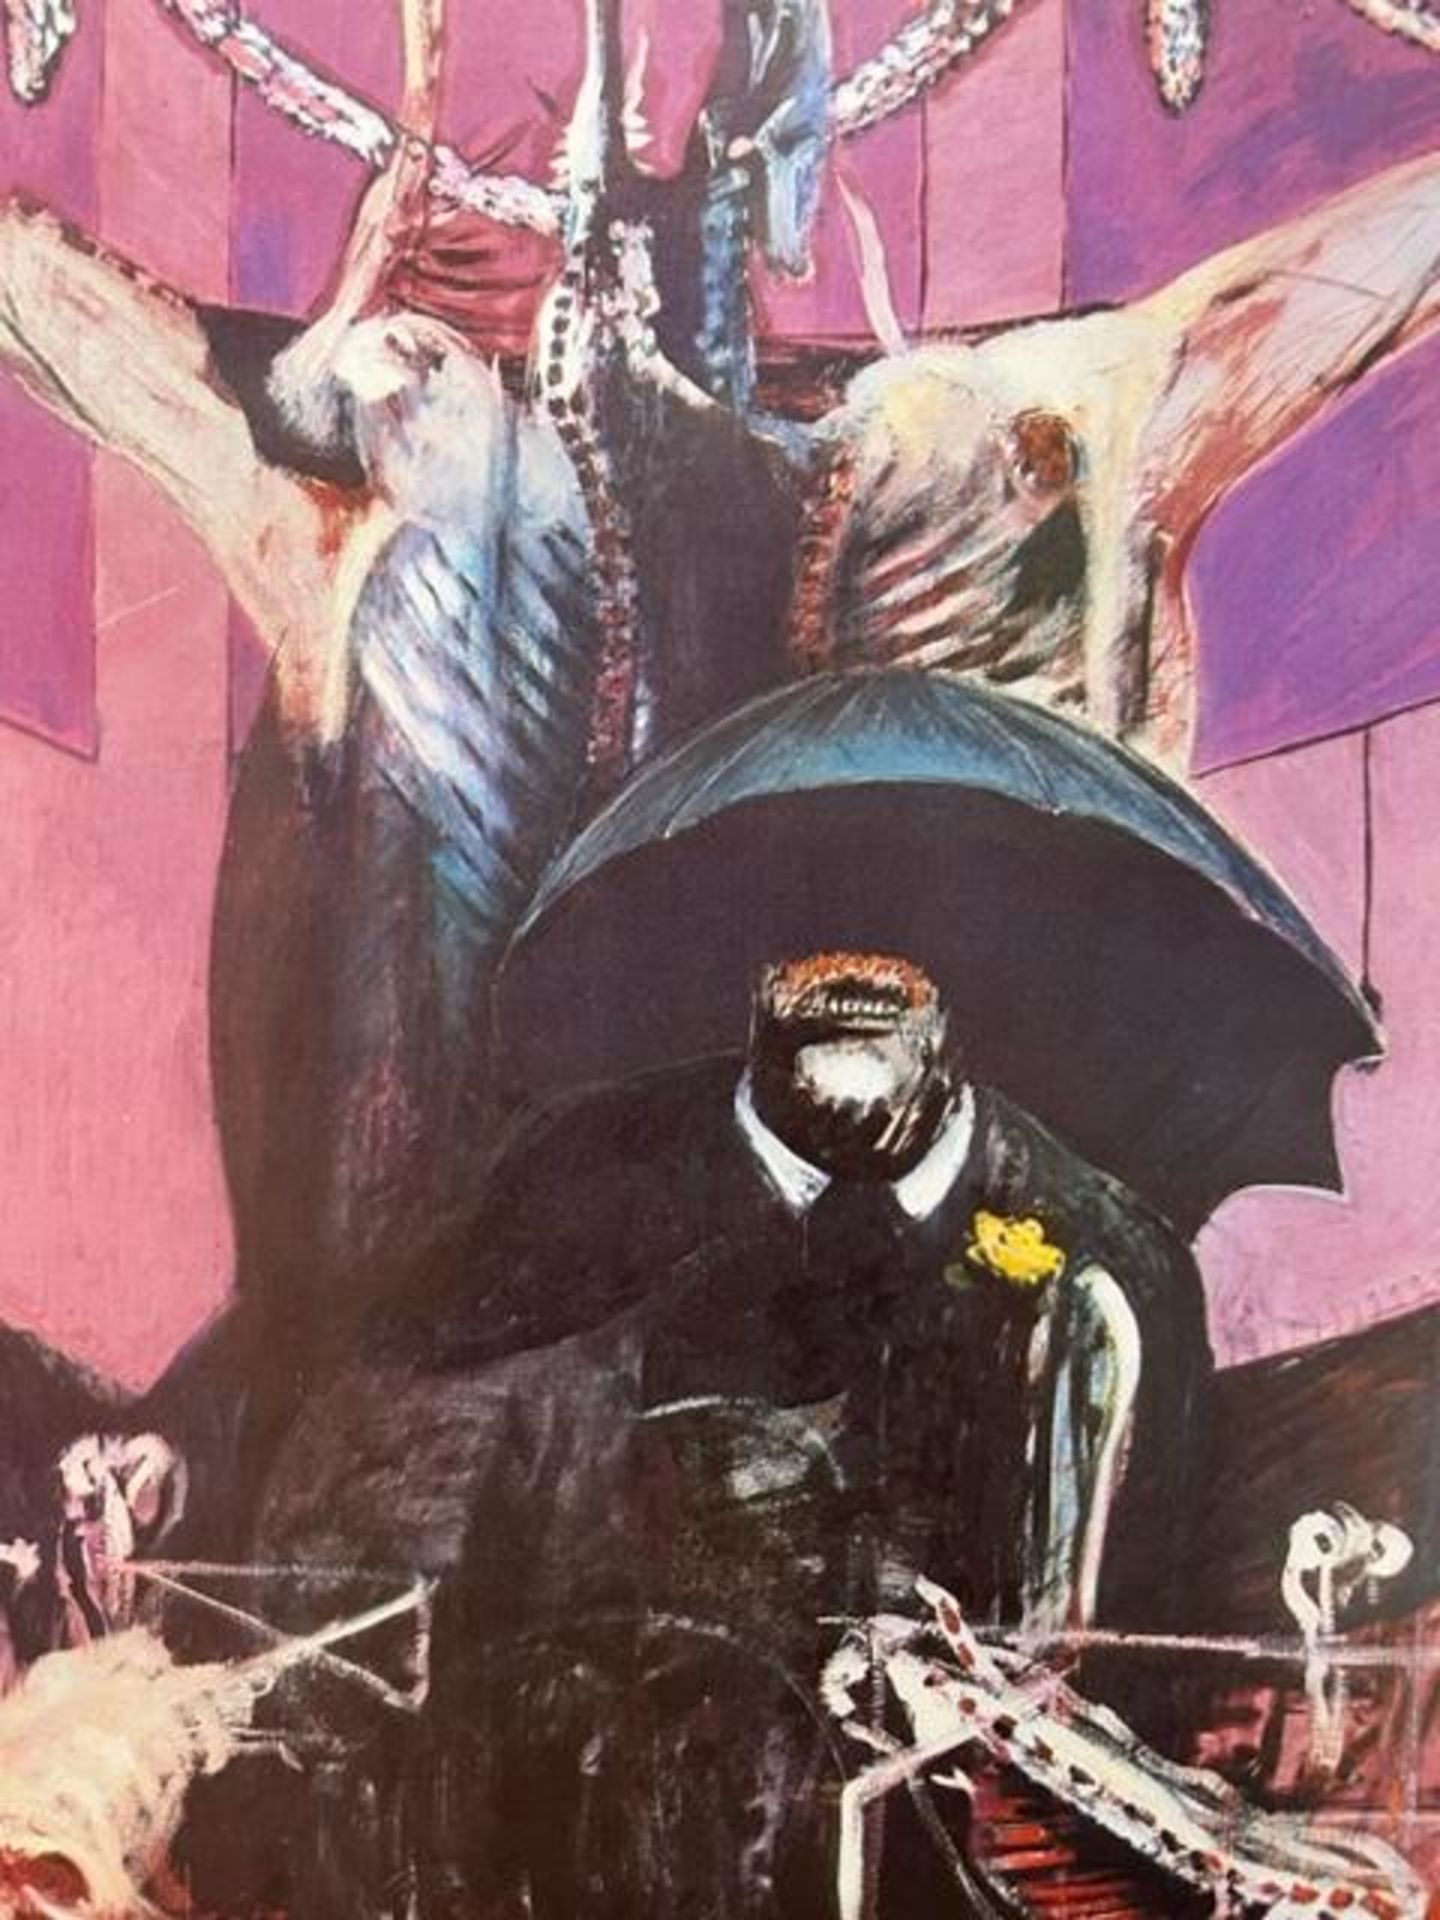 Francis Bacon "Painting" Print. - Image 4 of 12